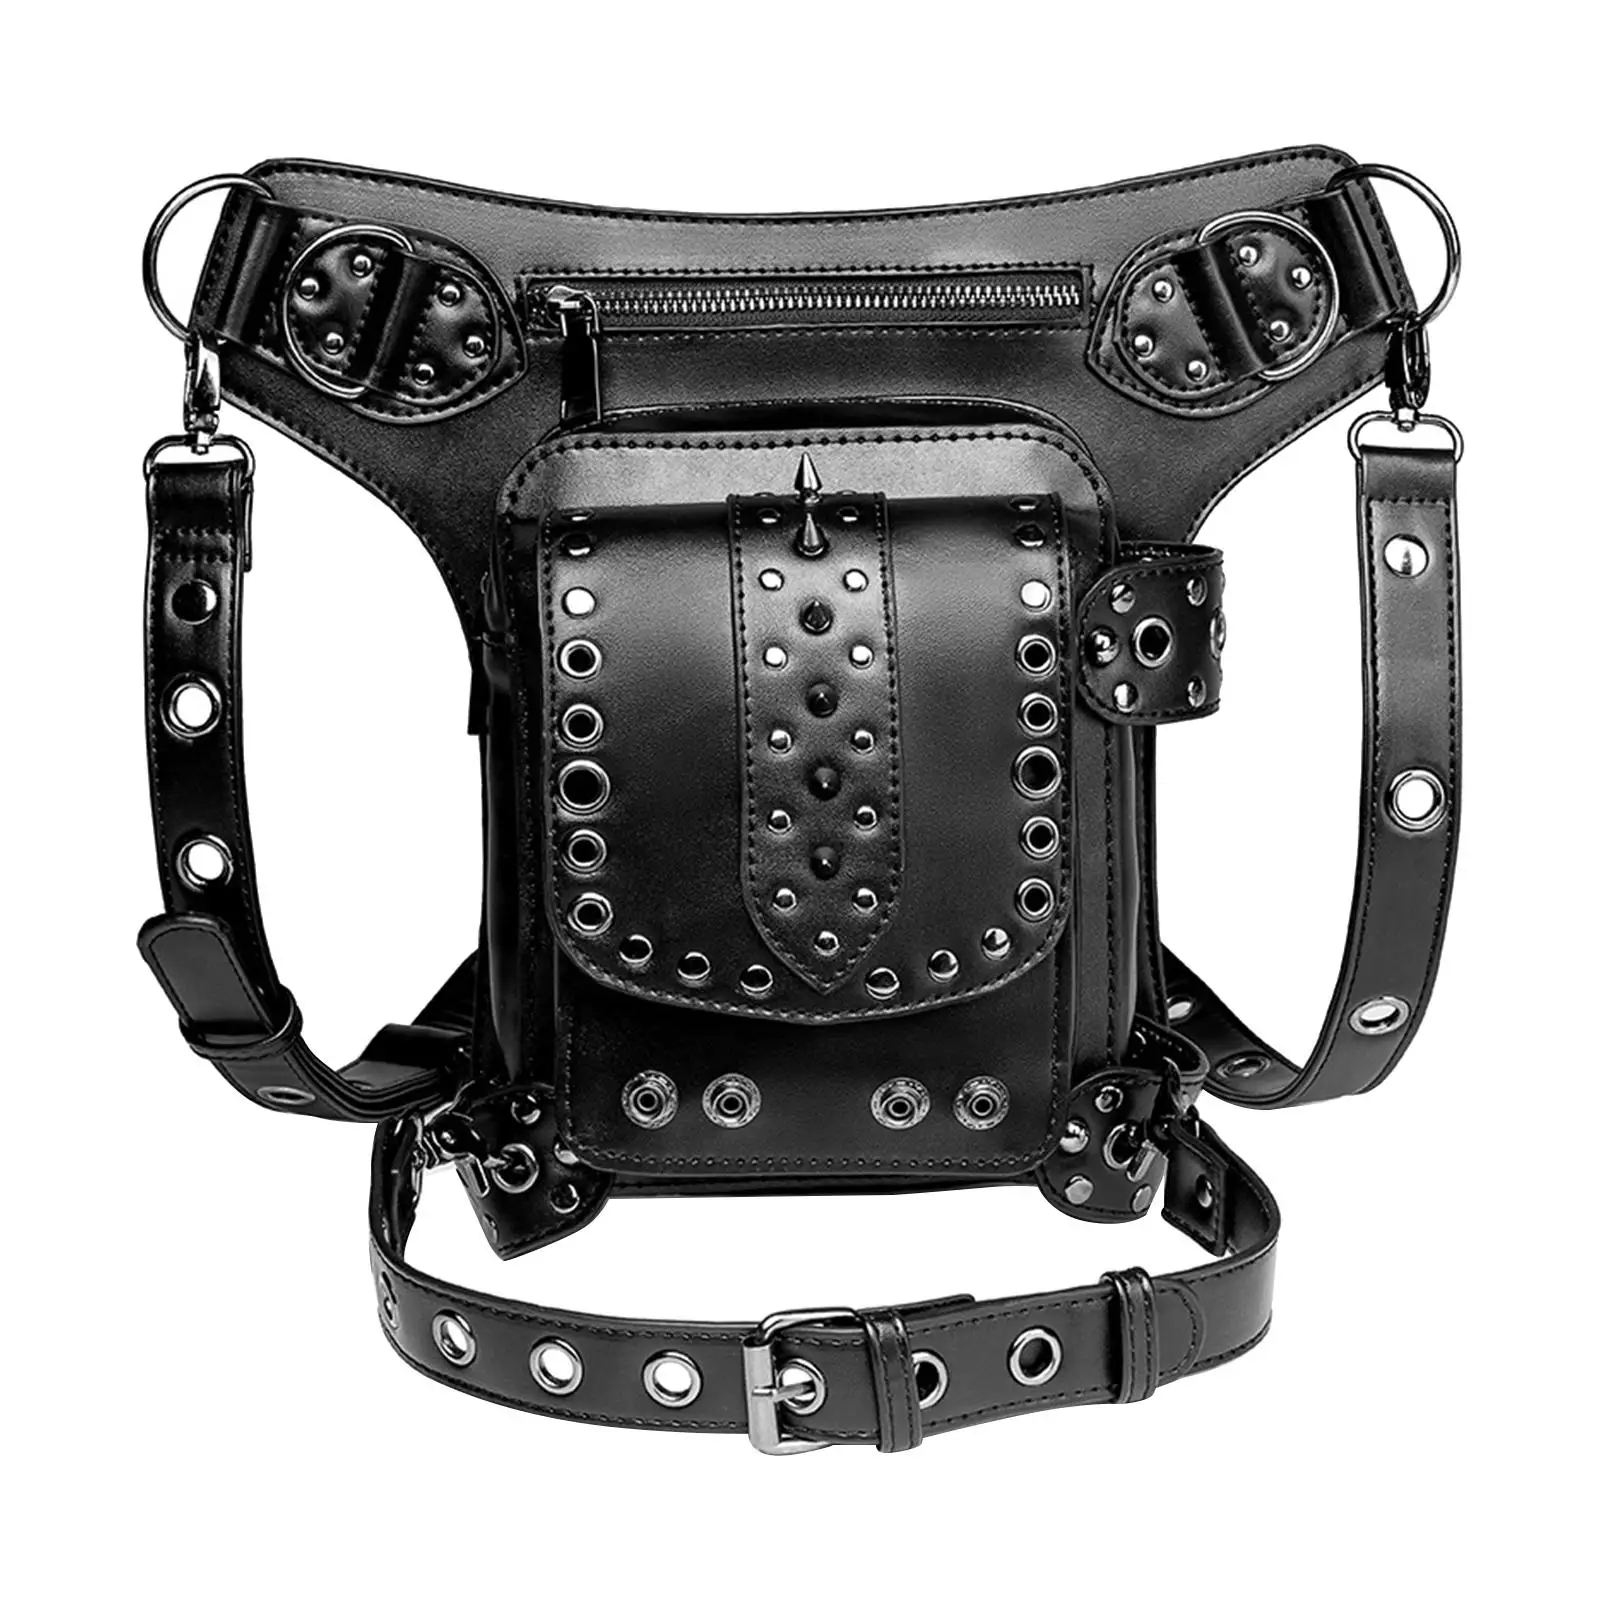 Steampunk Waist Bag with Detachable Strap Retro Style Waist Fanny Pack for Travel